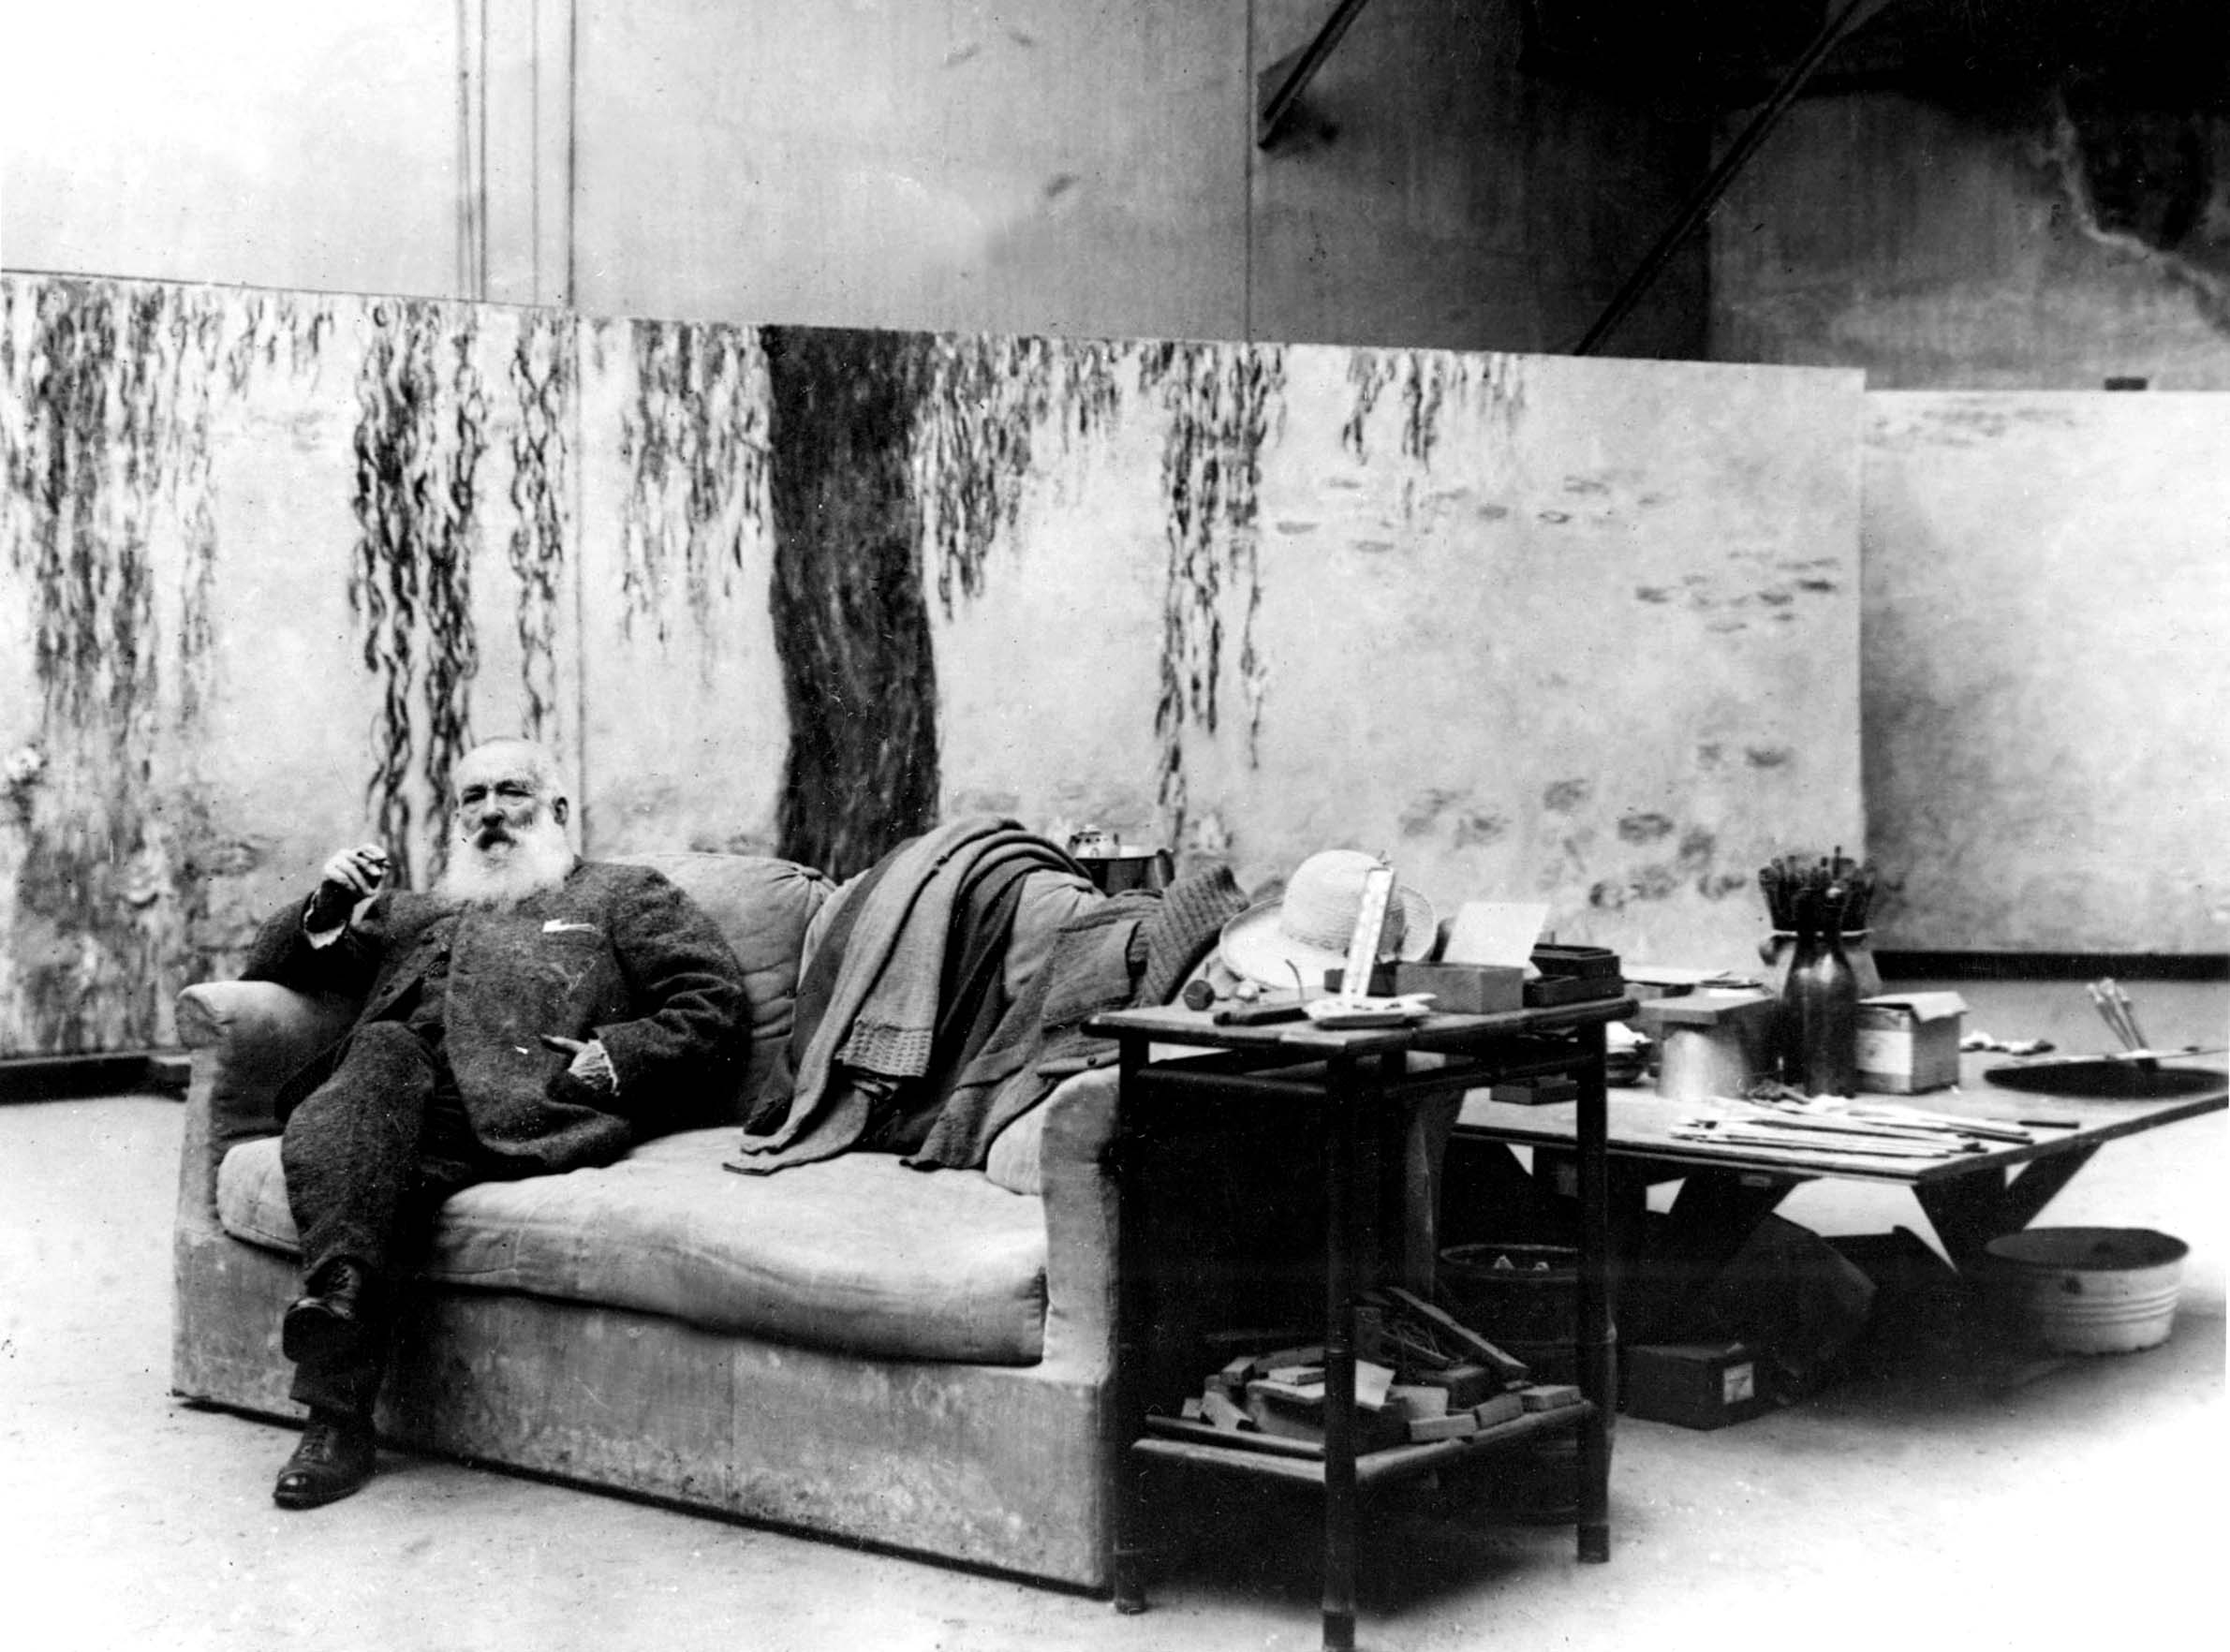 photo of the French painter Claude Monet in his workshop in front of one of his paintings Waterlilies c. 1918 / Bridgeman Images